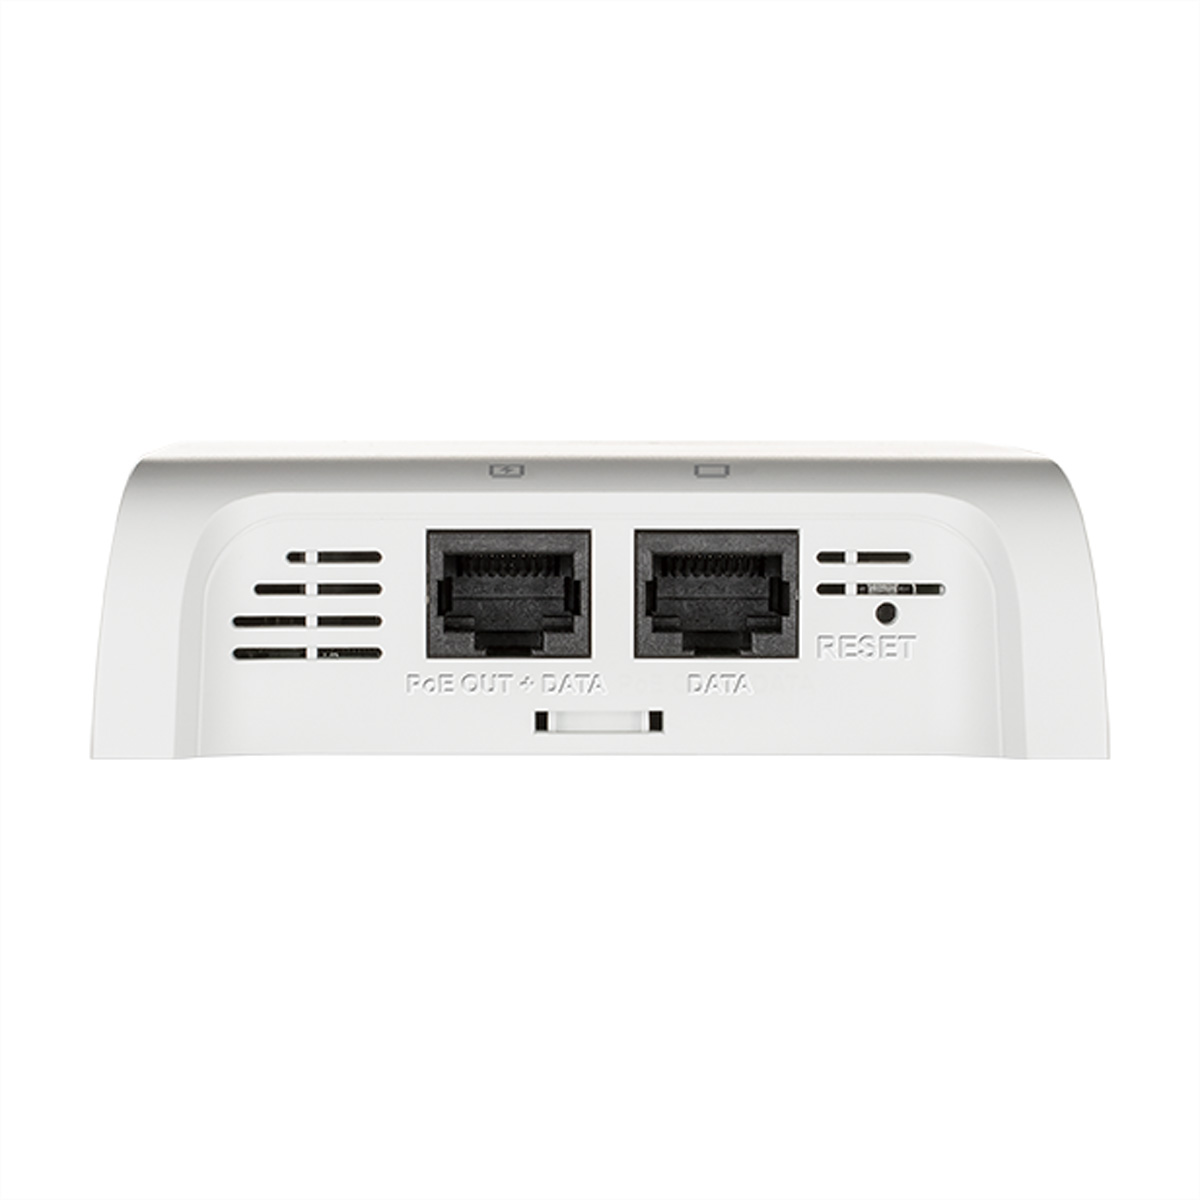 D-LINK DAP-2622 1,2 Points PoE Gbit/s 2 Wireless AC1200 Access Access In-Wall Wave WLAN Poin